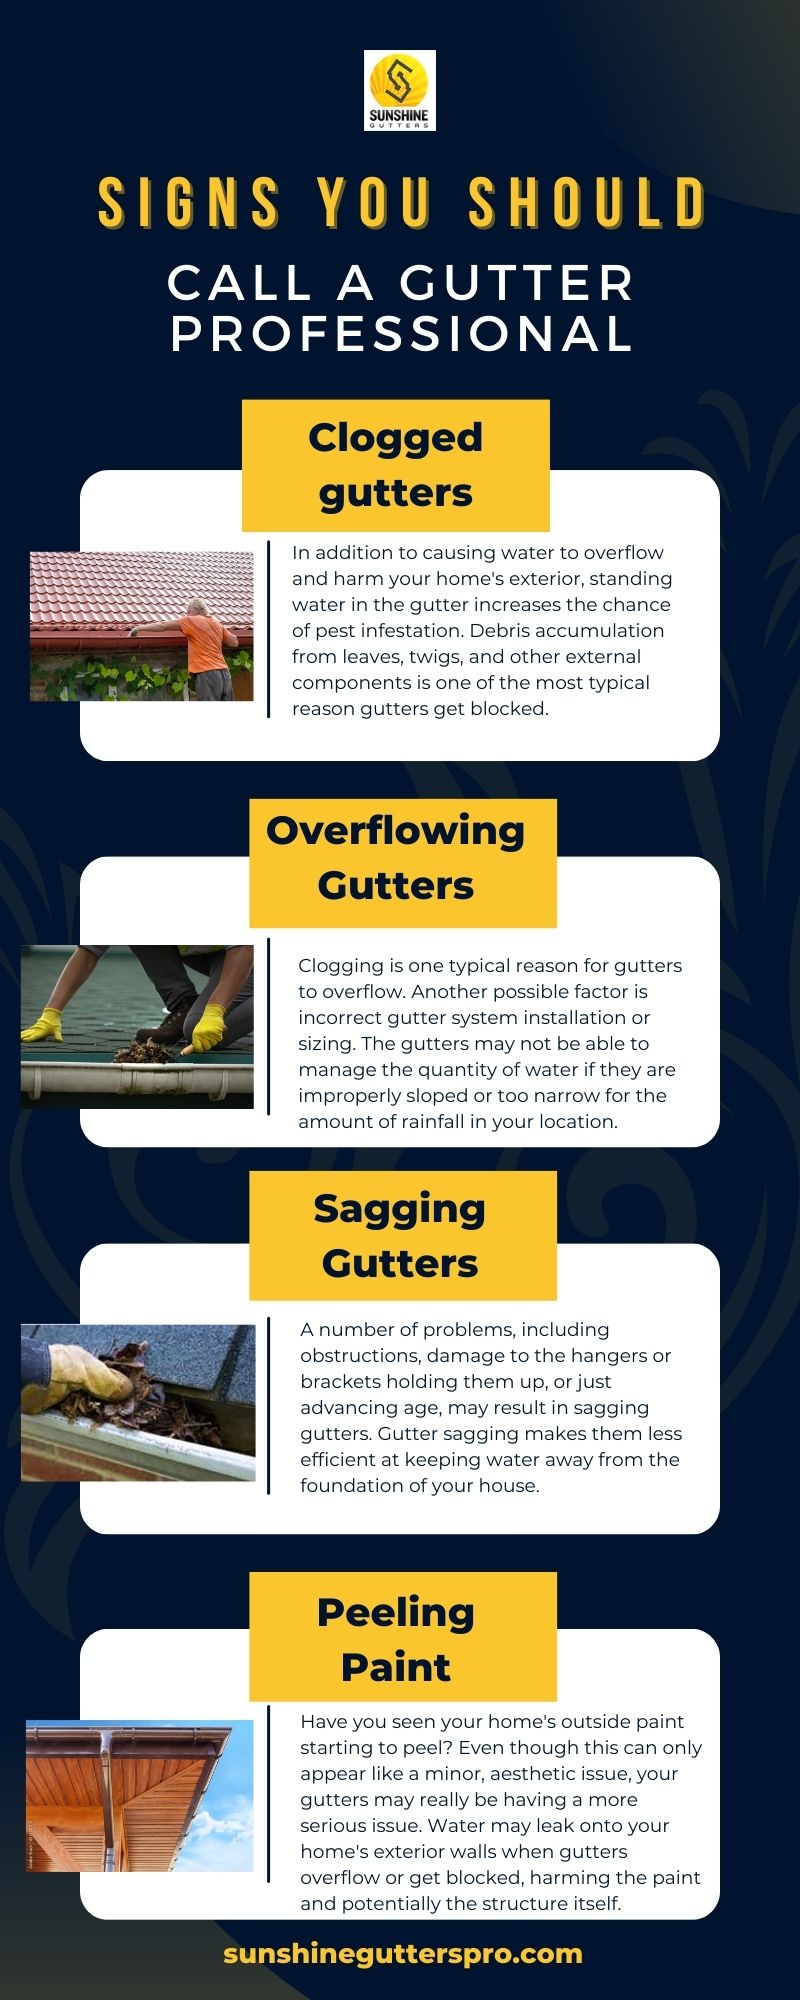 Signs You Should Call a Gutter Professional